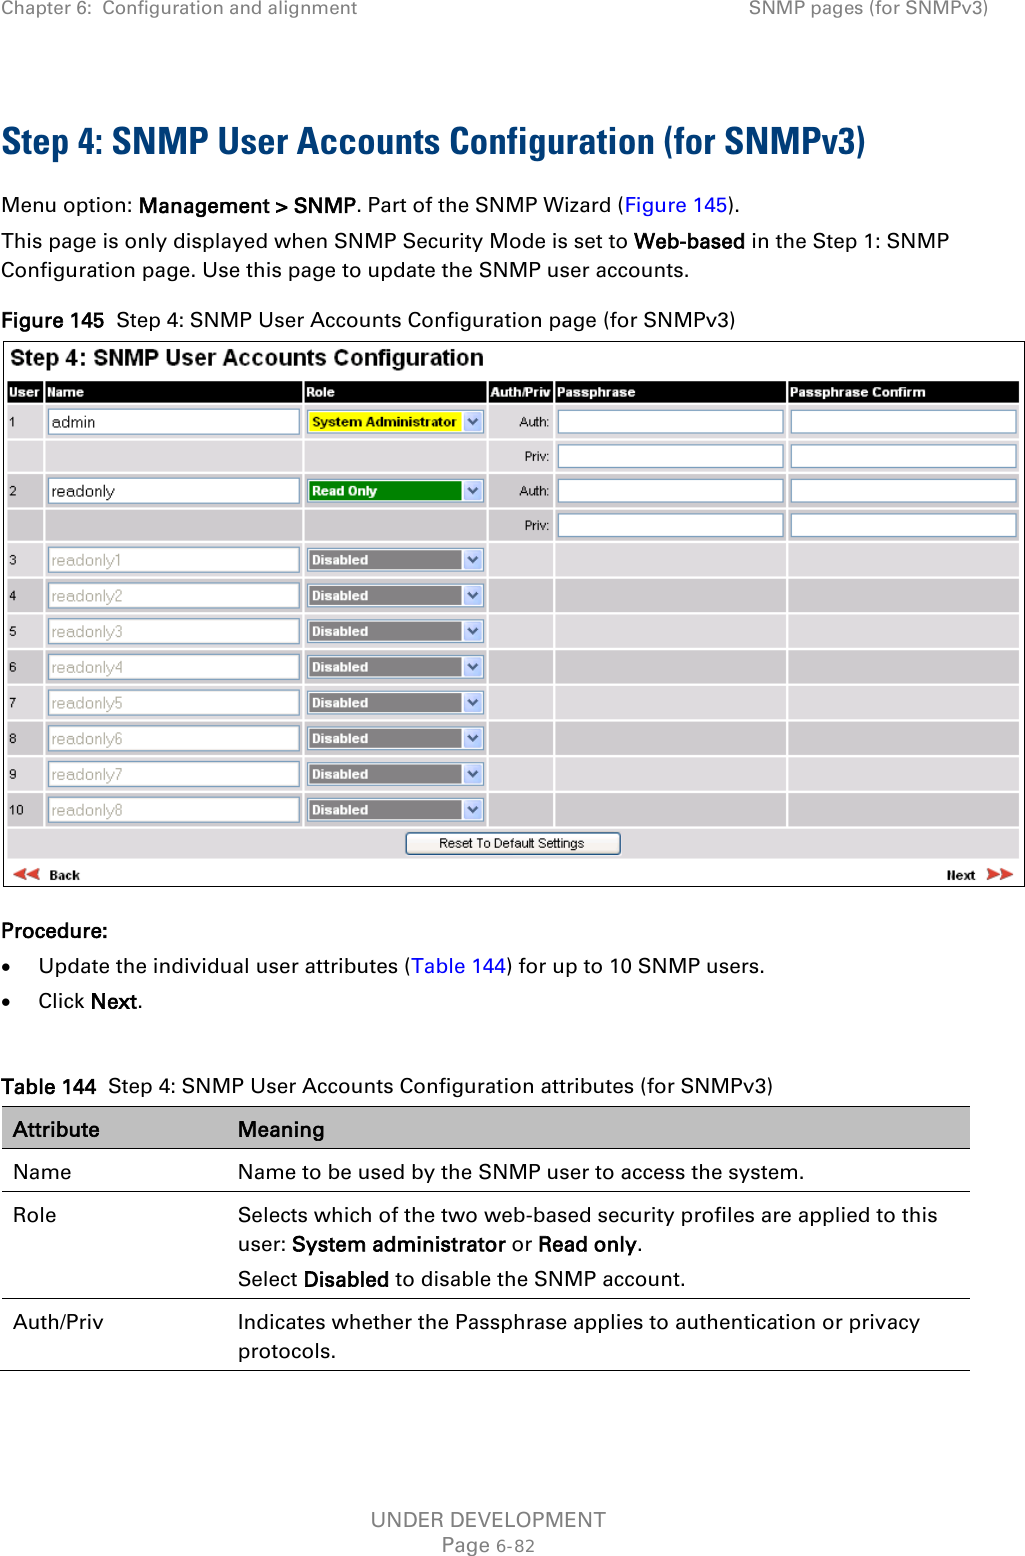 Chapter 6:  Configuration and alignment SNMP pages (for SNMPv3)  Step 4: SNMP User Accounts Configuration (for SNMPv3) Menu option: Management &gt; SNMP. Part of the SNMP Wizard (Figure 145). This page is only displayed when SNMP Security Mode is set to Web-based in the Step 1: SNMP Configuration page. Use this page to update the SNMP user accounts. Figure 145  Step 4: SNMP User Accounts Configuration page (for SNMPv3)  Procedure: • Update the individual user attributes (Table 144) for up to 10 SNMP users. • Click Next.  Table 144  Step 4: SNMP User Accounts Configuration attributes (for SNMPv3) Attribute Meaning Name Name to be used by the SNMP user to access the system. Role Selects which of the two web-based security profiles are applied to this user: System administrator or Read only. Select Disabled to disable the SNMP account. Auth/Priv Indicates whether the Passphrase applies to authentication or privacy protocols. UNDER DEVELOPMENT Page 6-82 